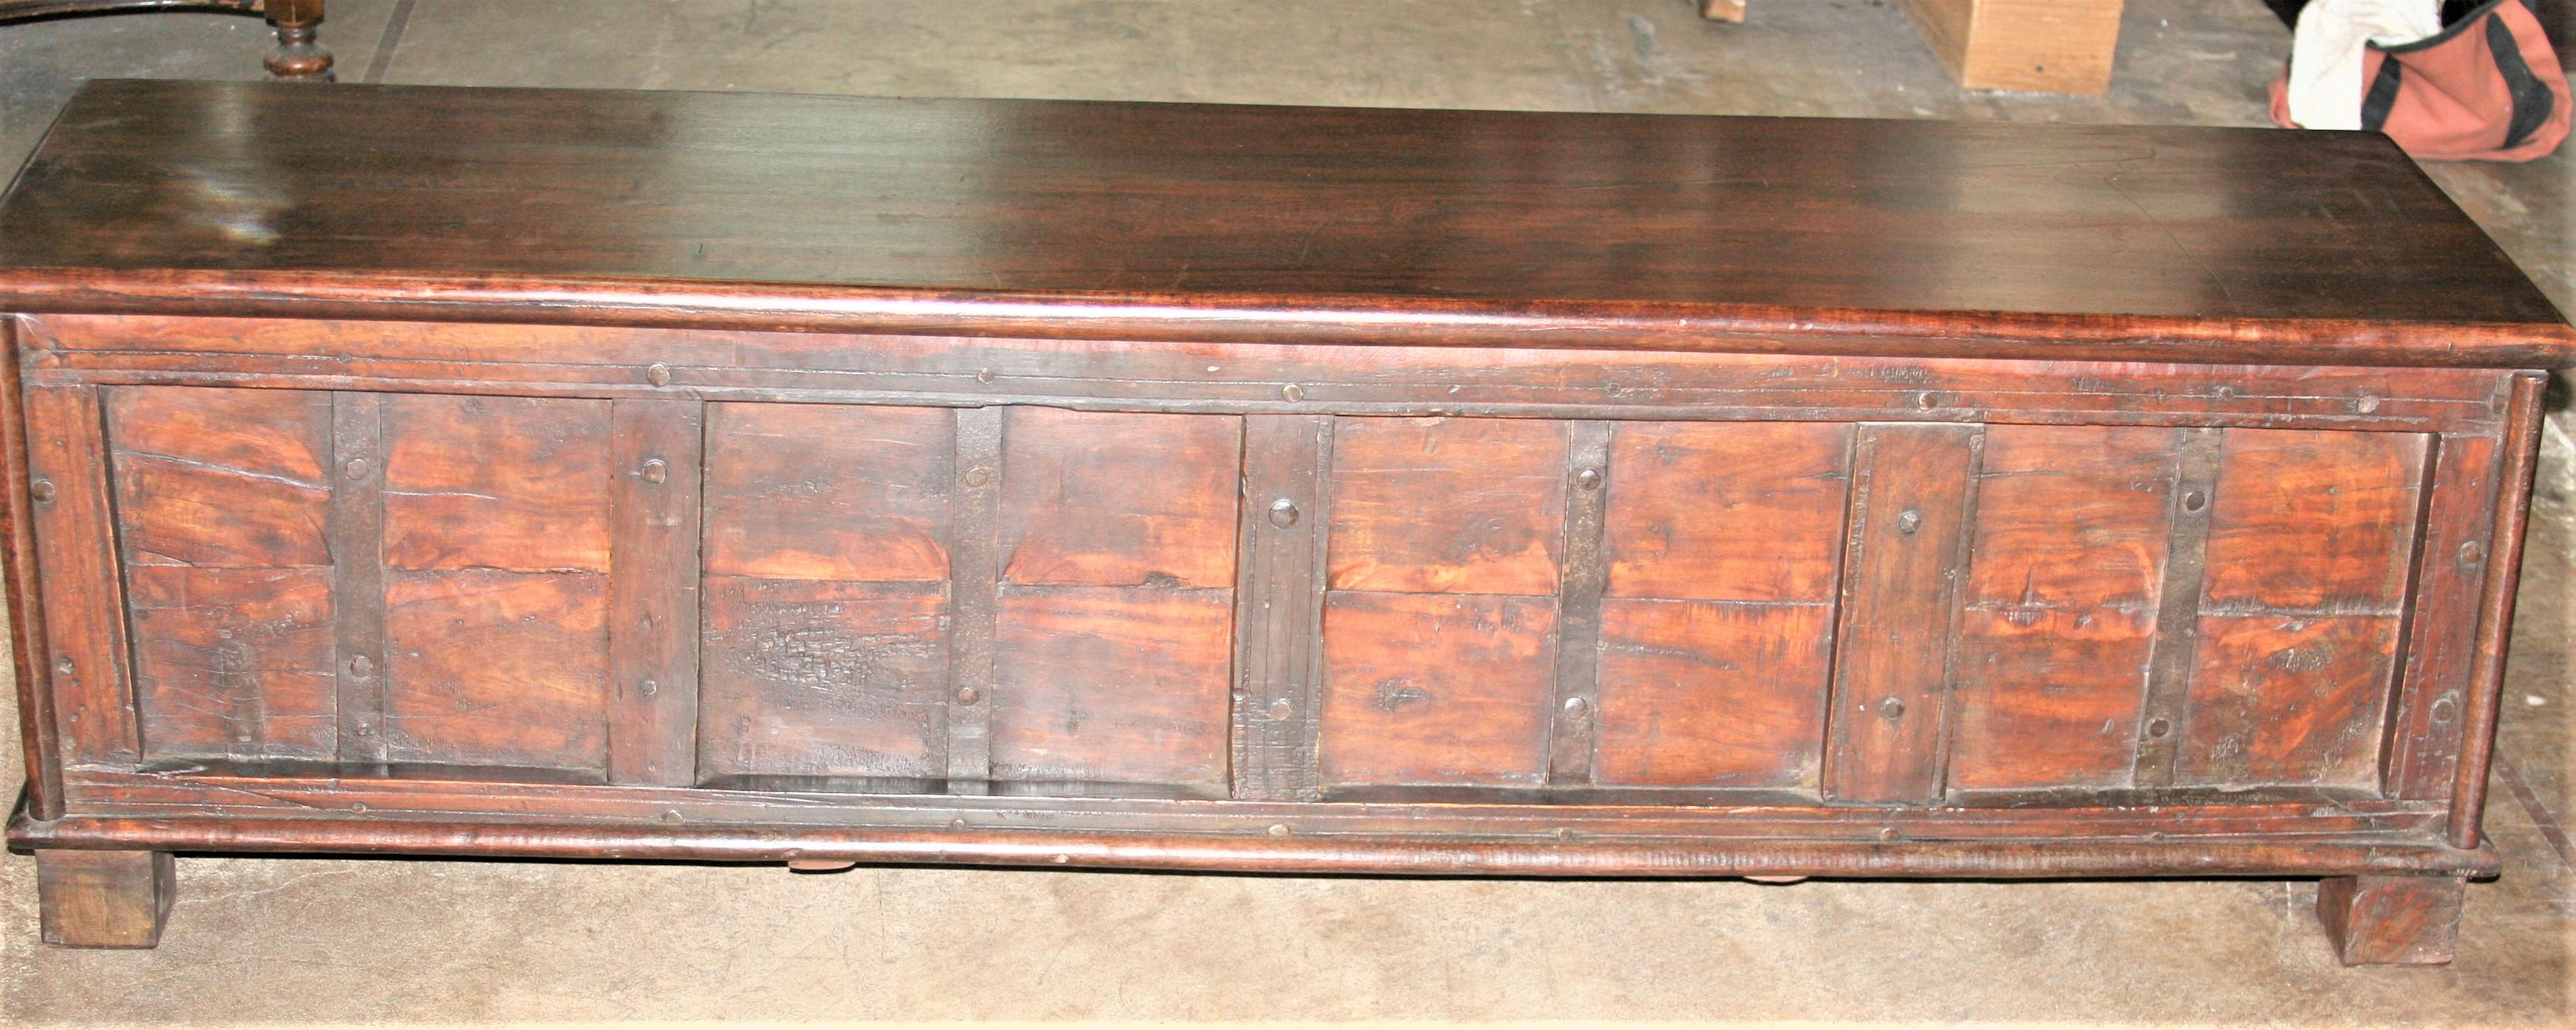 This chest was originally crafted as linen chest in the 19th century but later modified as a storage cum bench for placing behind the foot board of king size beds. This makes it a superb conversation piece for any grand bed room. The lid opens to a